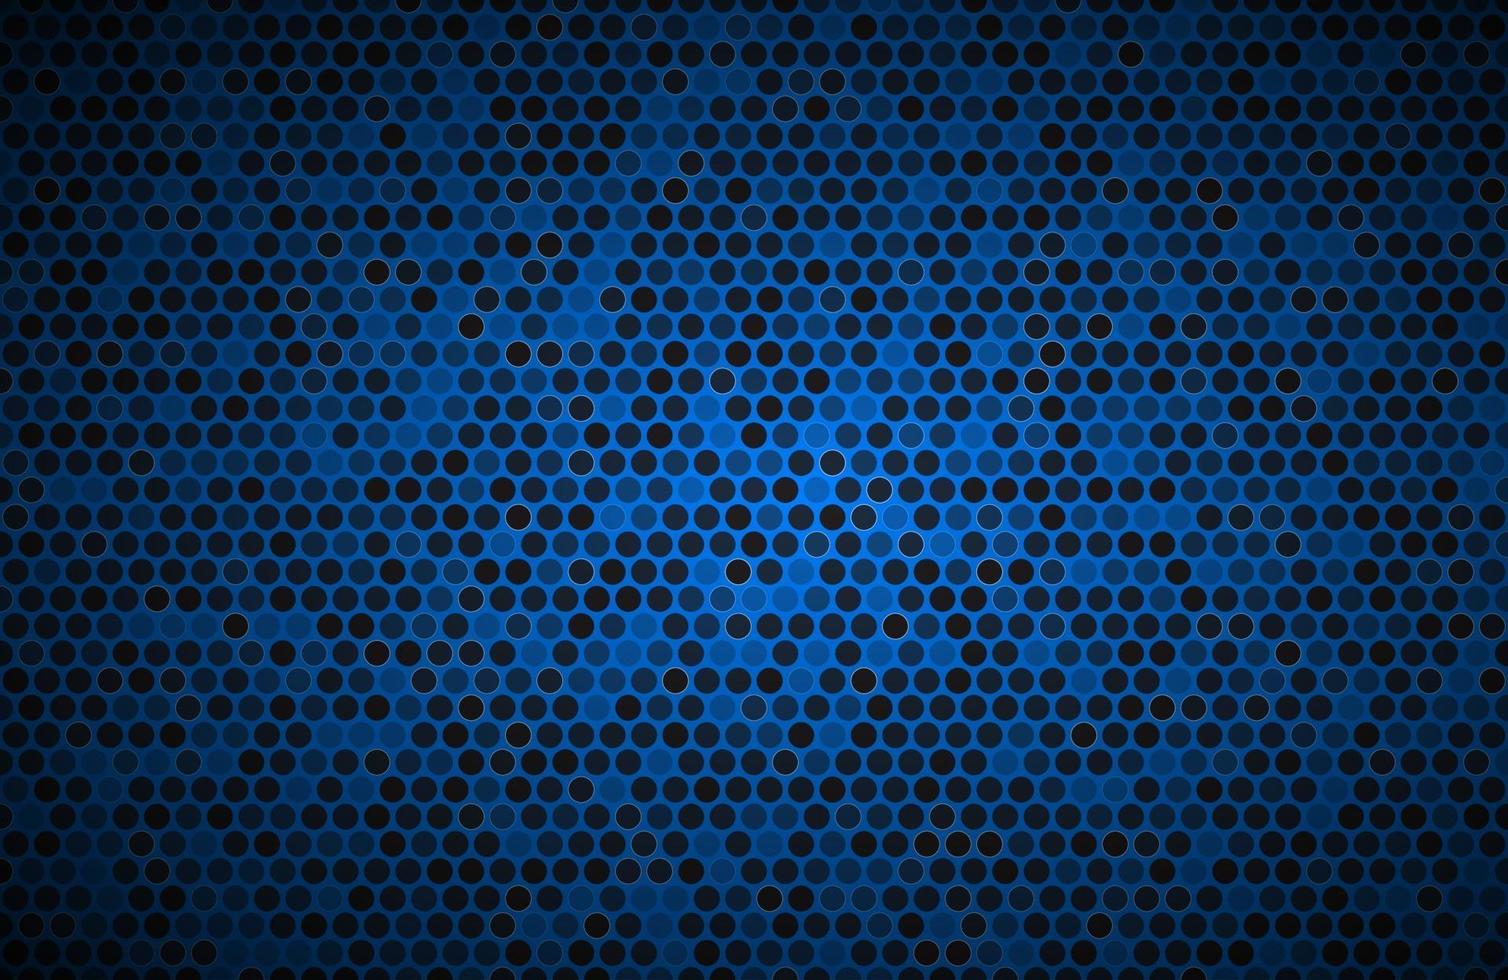 Dark blue widescreen background with wheels with different transparencies Modern geometric design Simple vector illustration